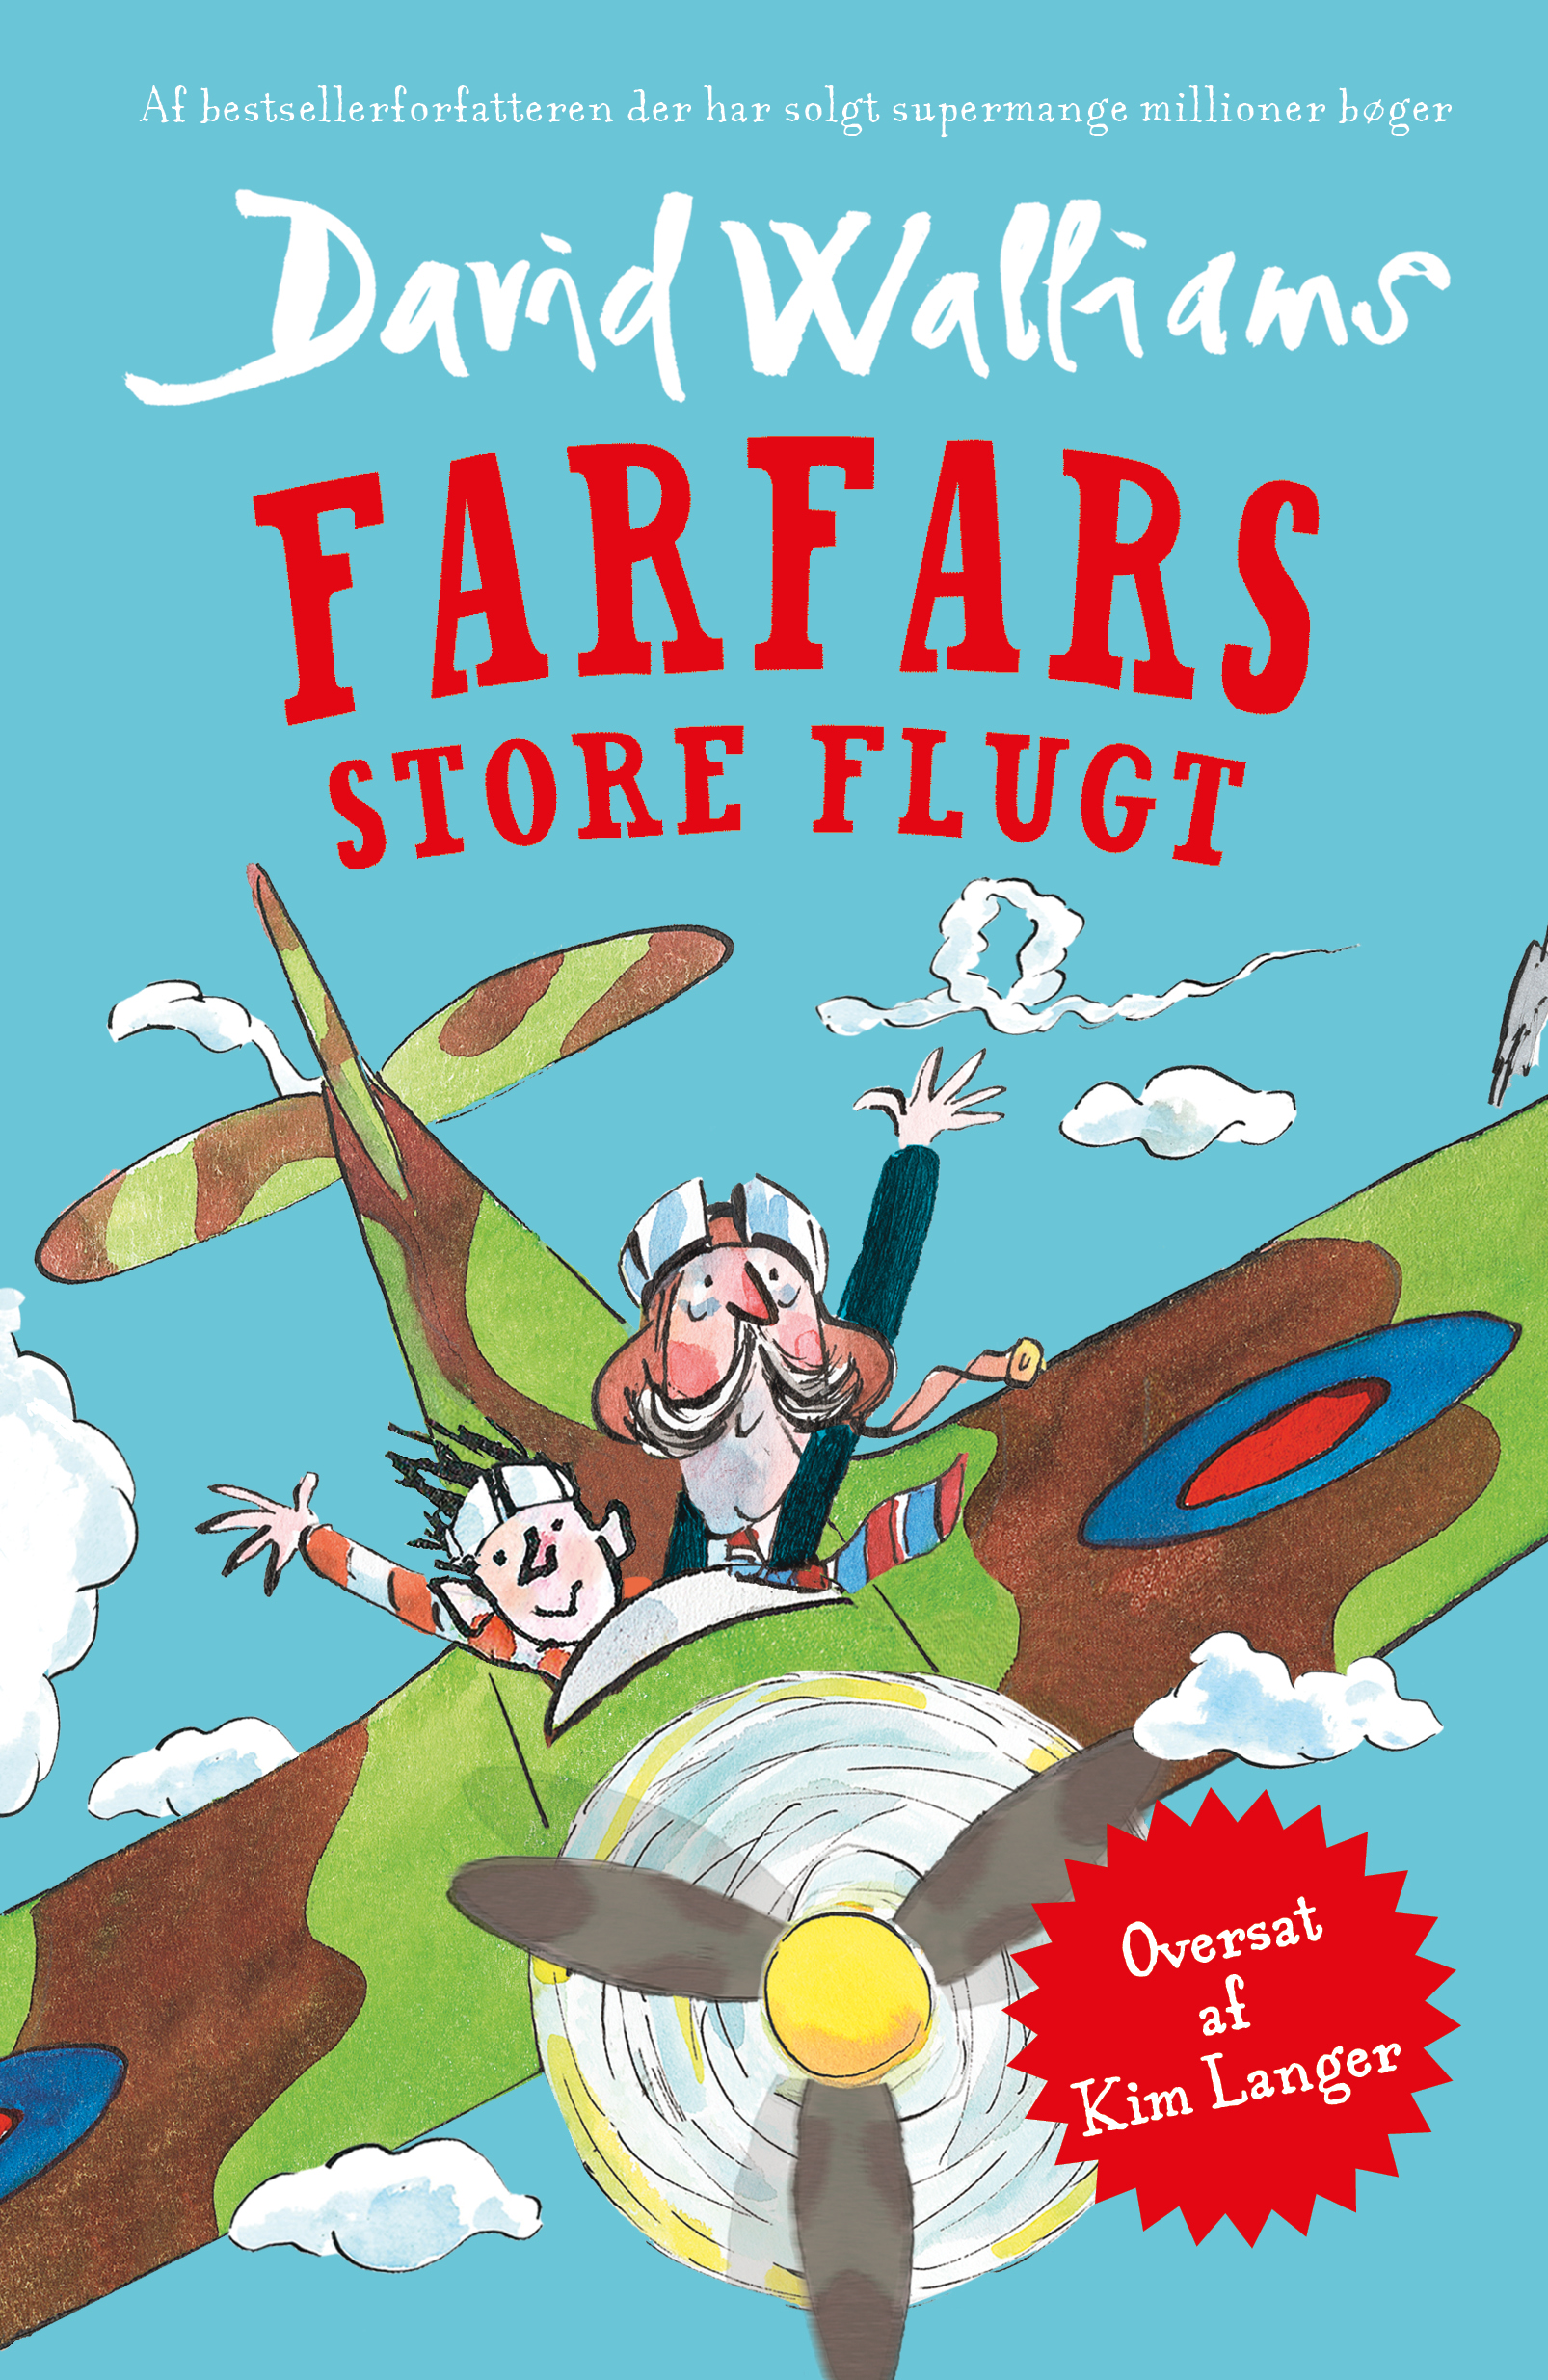 You are currently viewing Farfars store flugt